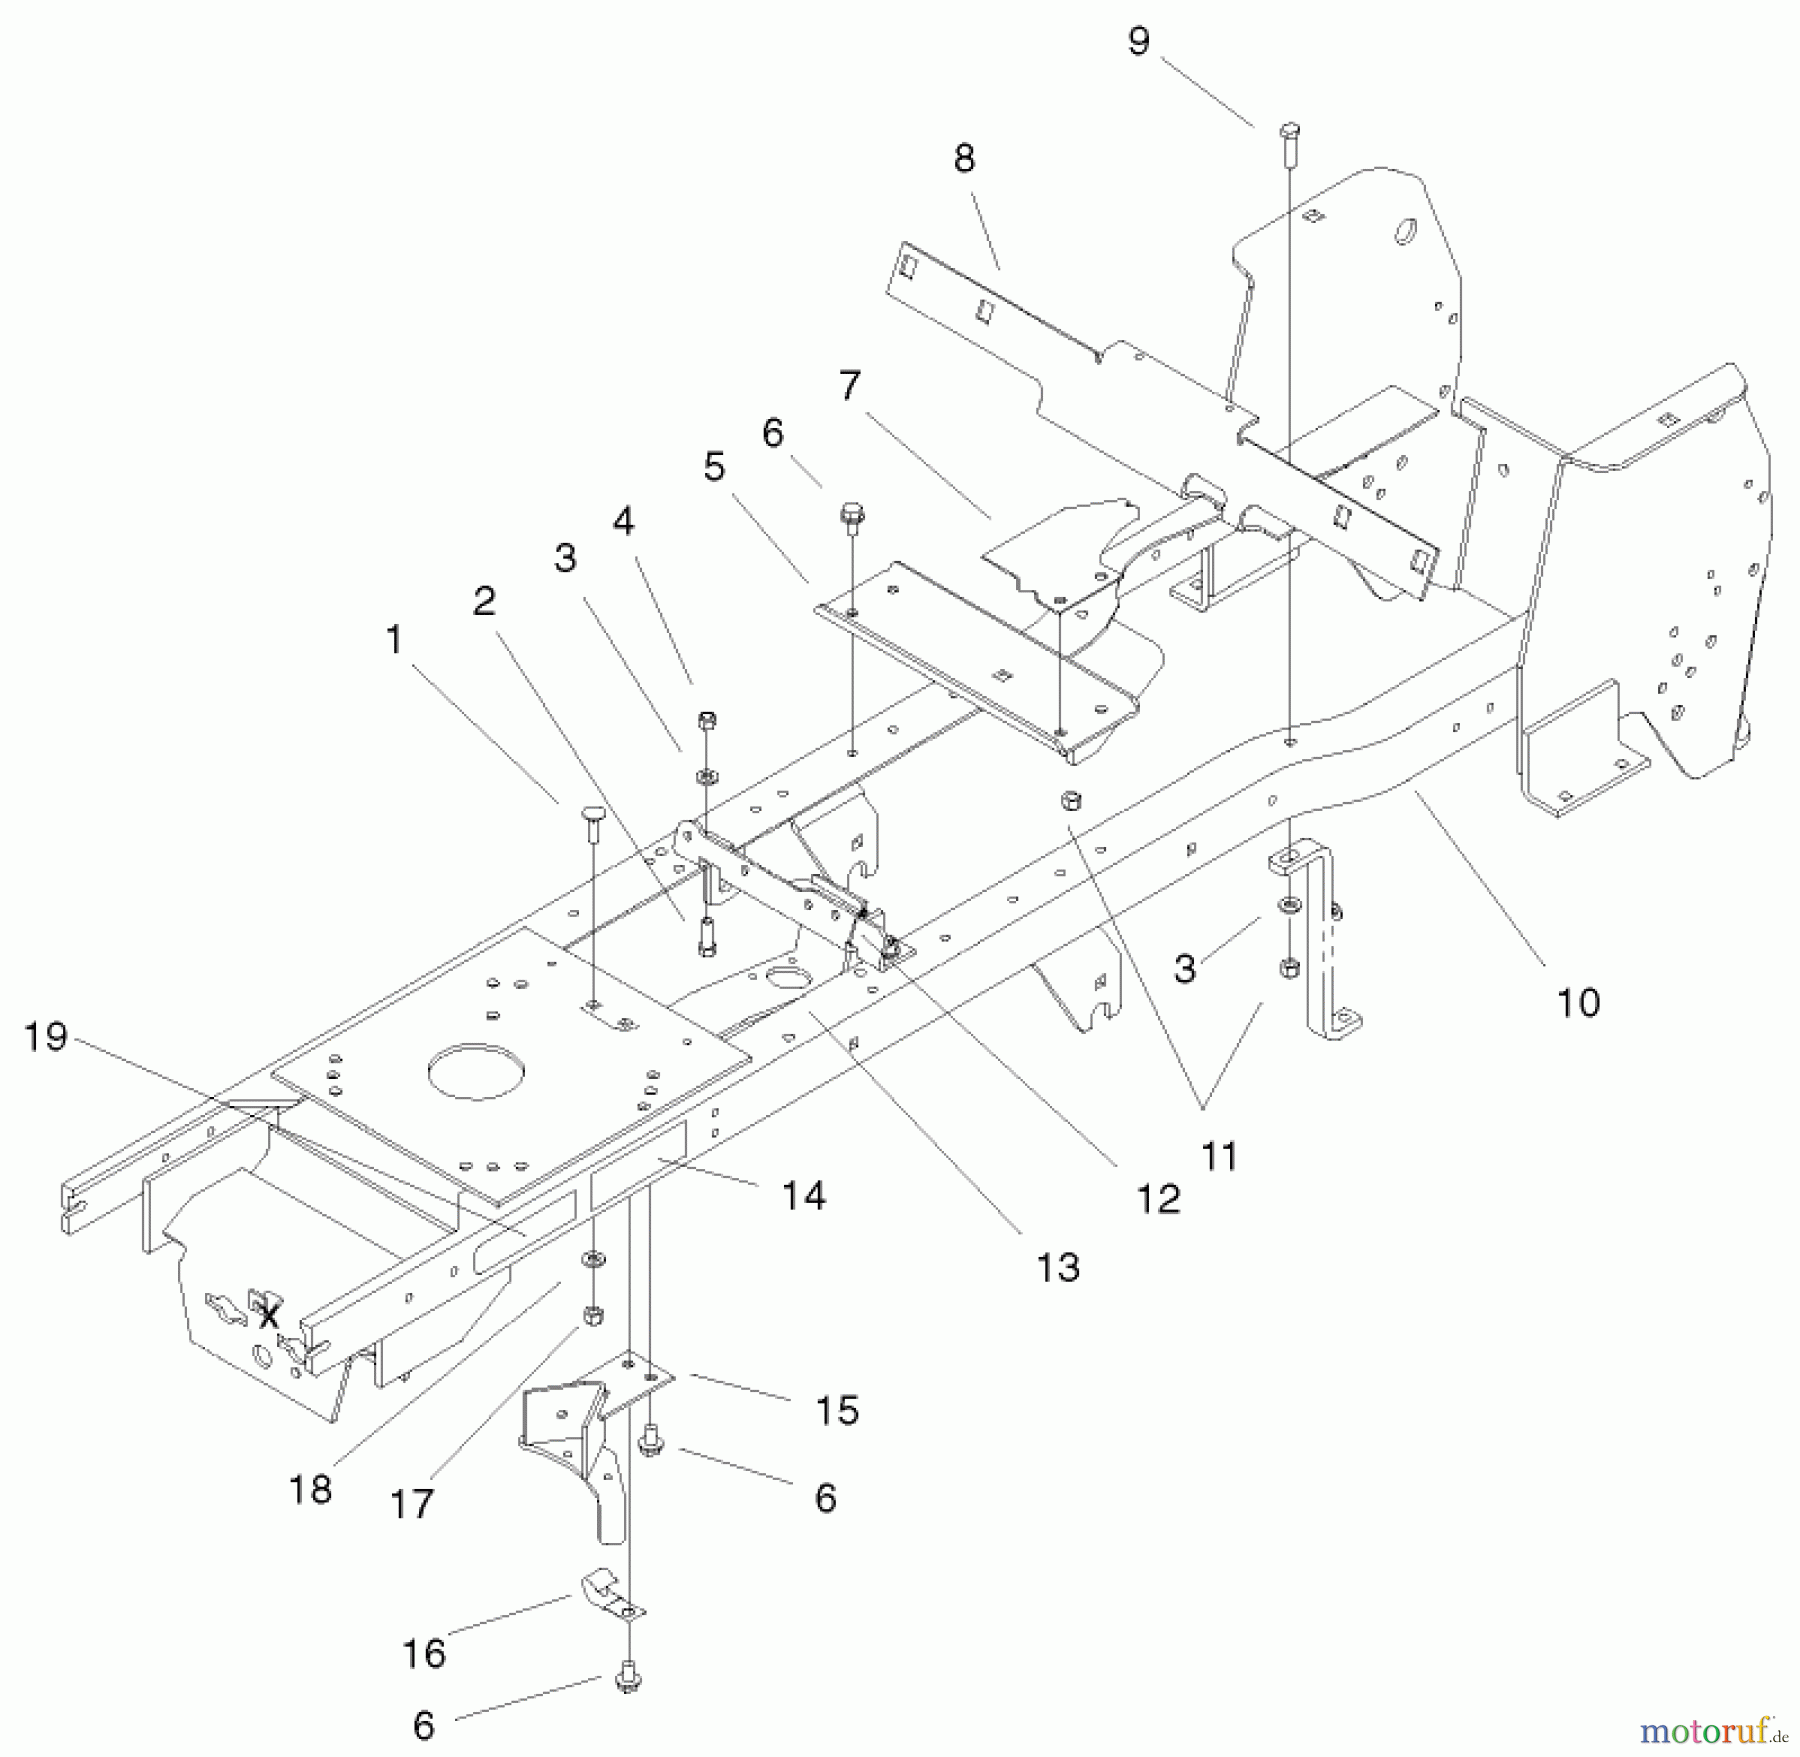  Toro Neu Mowers, Lawn & Garden Tractor Seite 1 72087 (268-H) - Toro 268-H Lawn and Garden Tractor, 2000 (200000001-200999999) FRAME ASSEMBLY